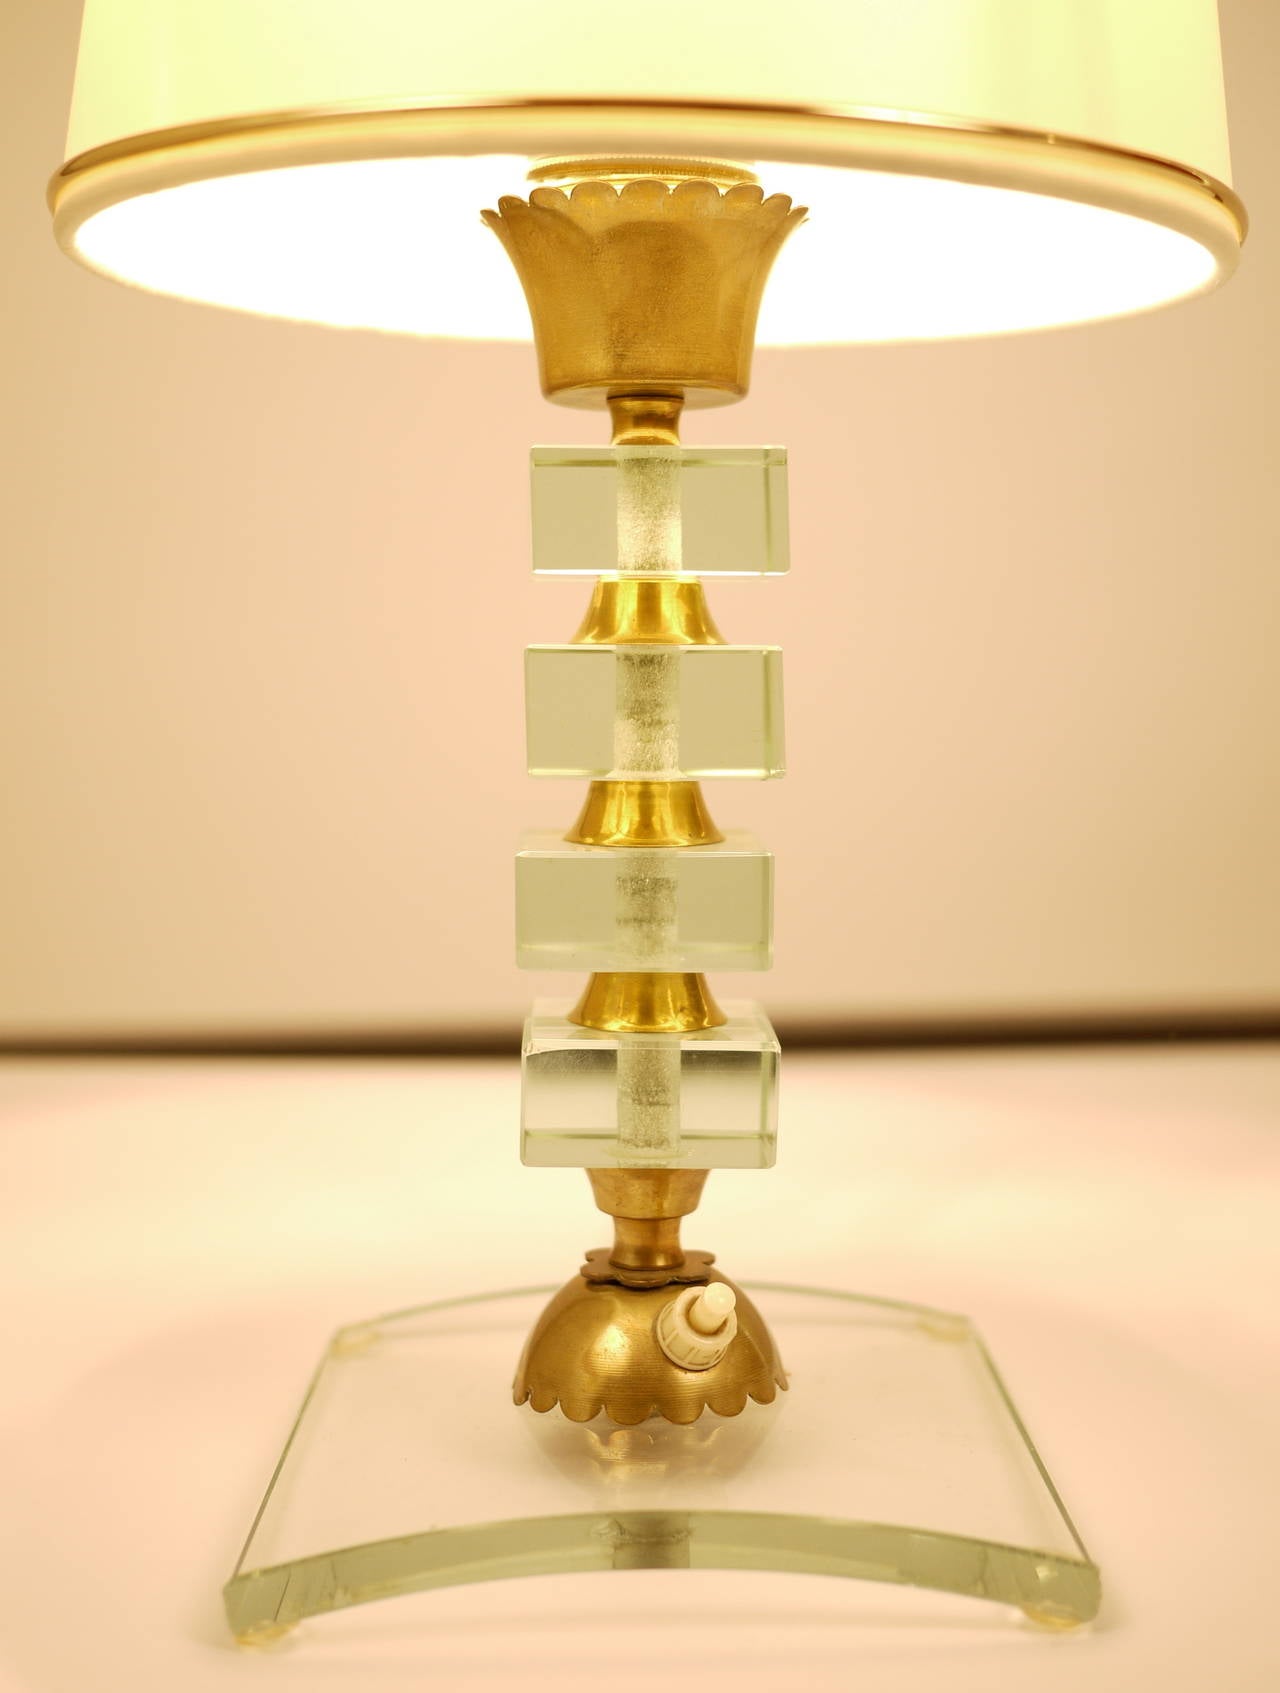 An Italian, 1959 table lamp in the style of Pietro Chiesa. Glass and brass.